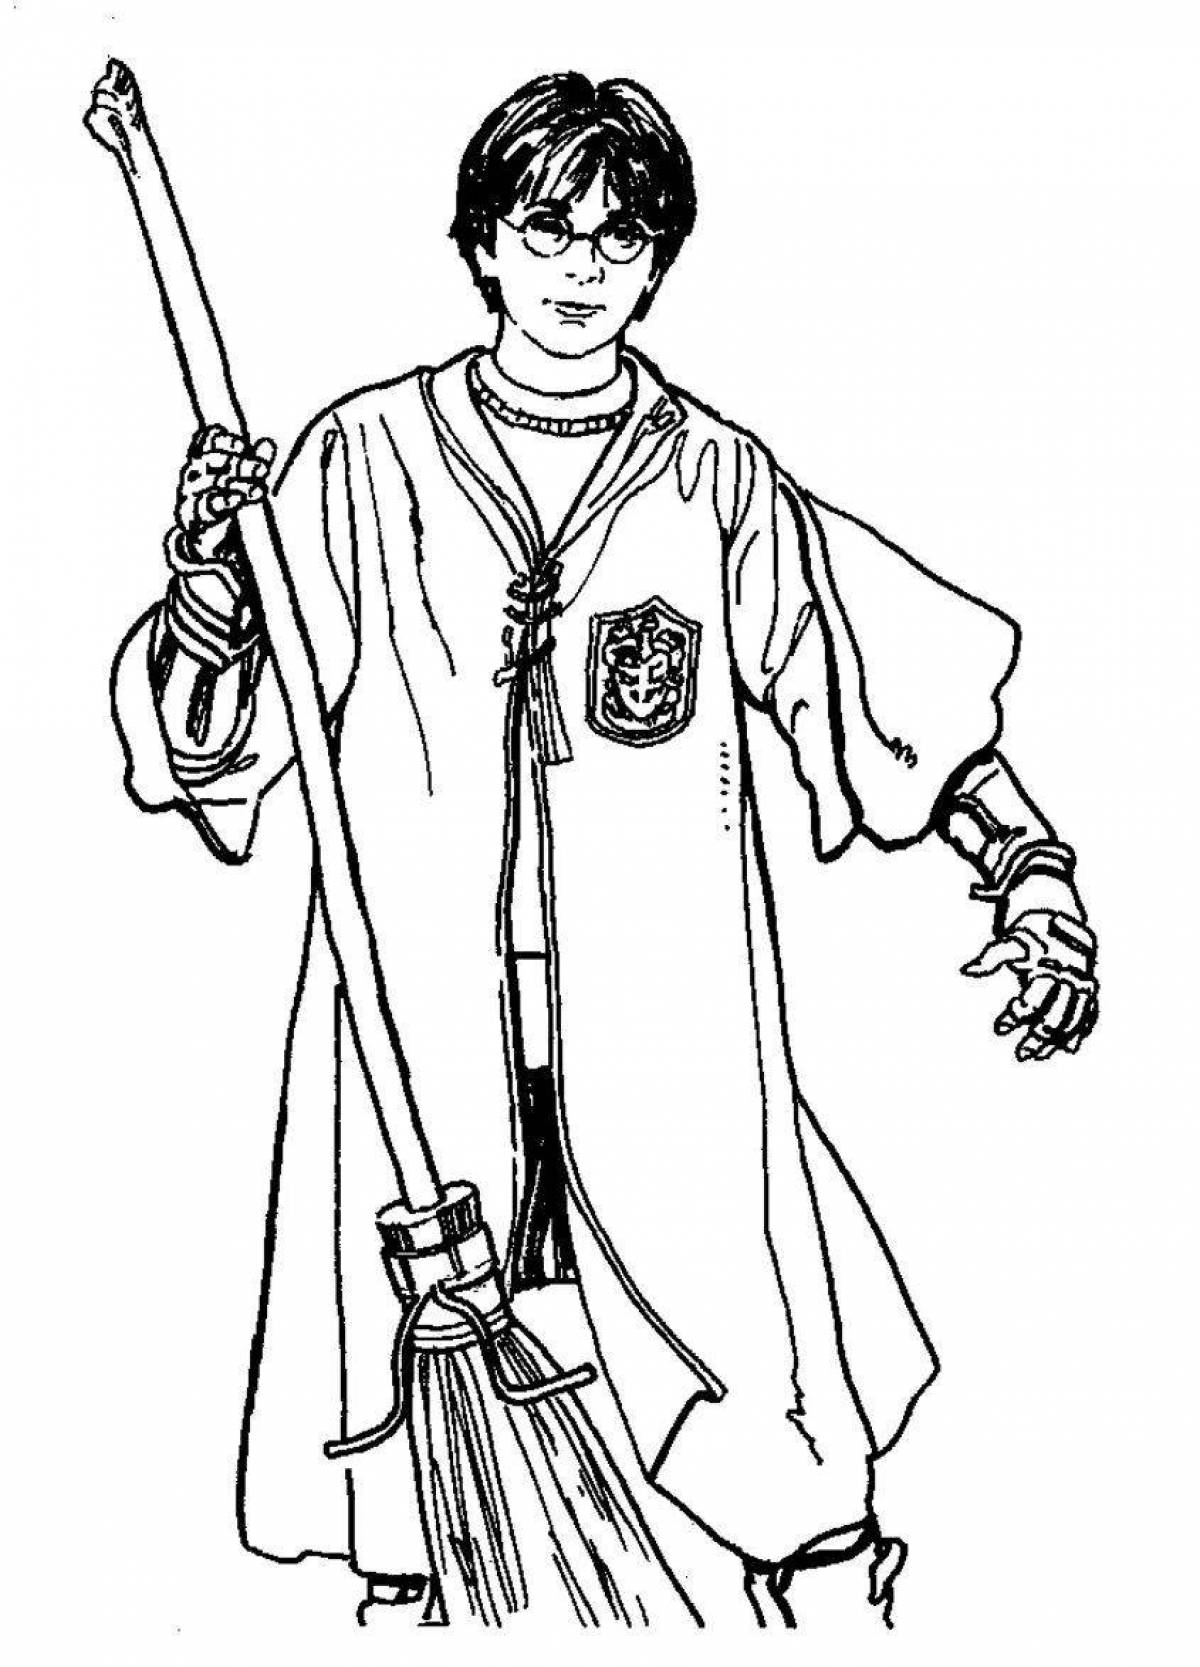 Cute harry potter coloring page